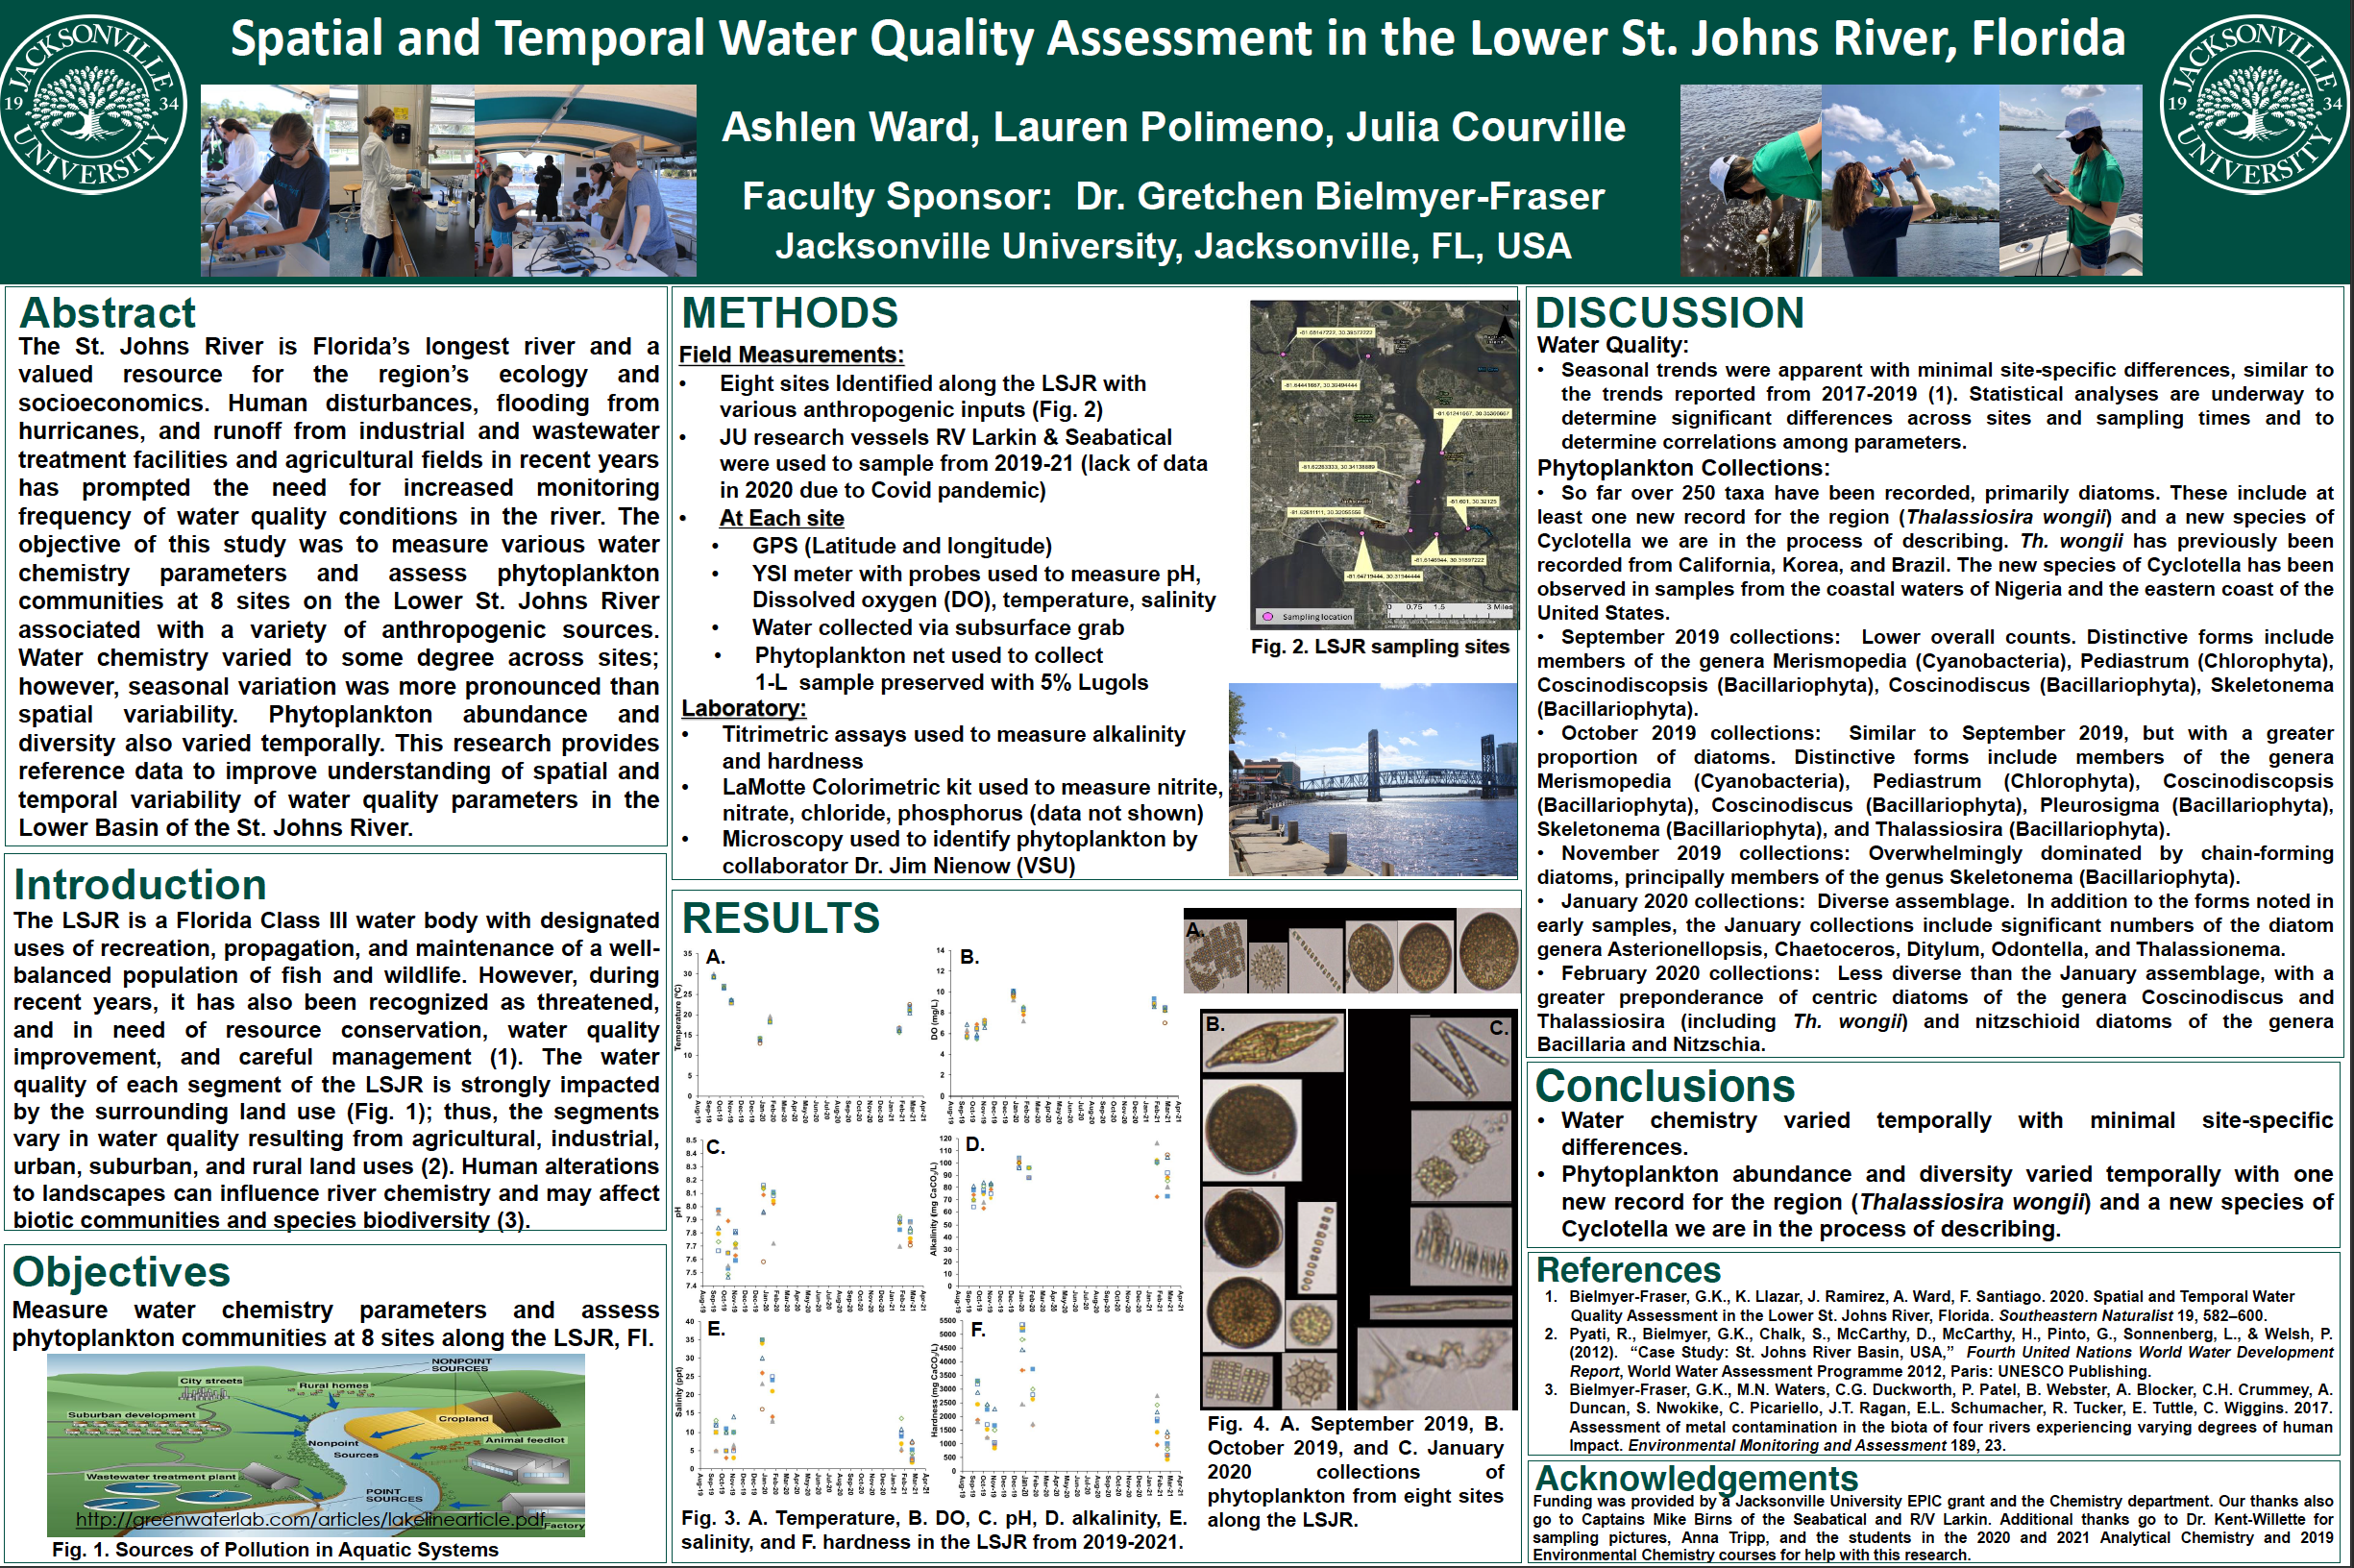 Showcase Image for Spatial and Temporal Water Quality Assessment in the Lower St. Johns River, Florida